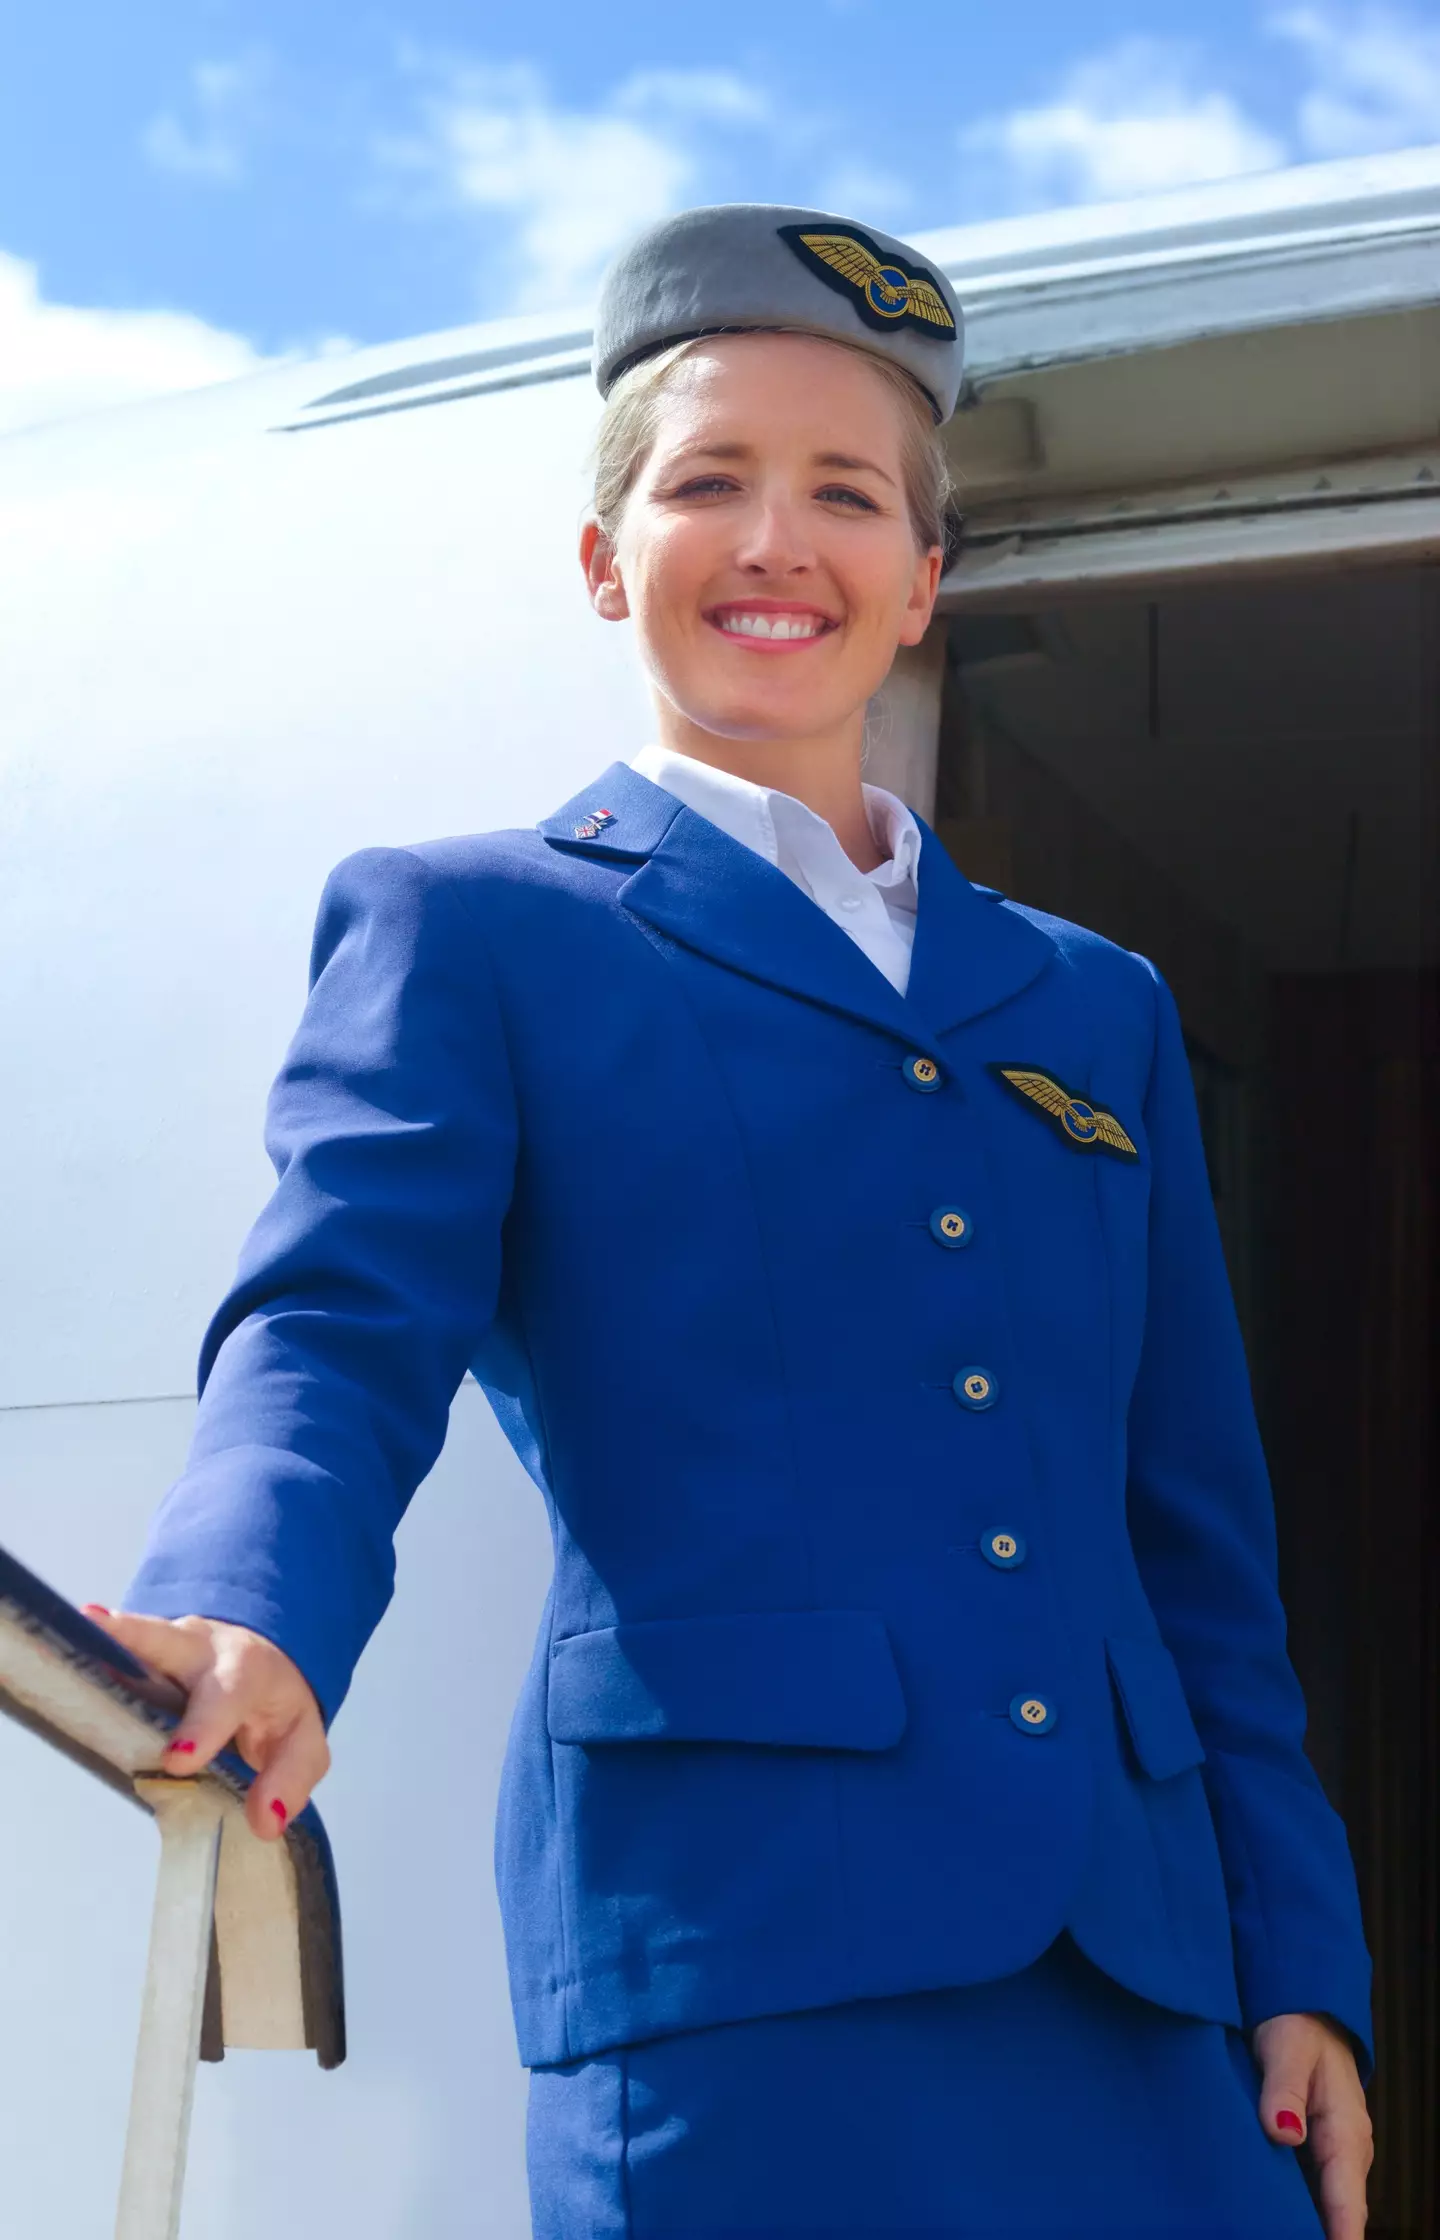 The real reason why flight attendants actually greet all passengers has been revealed.